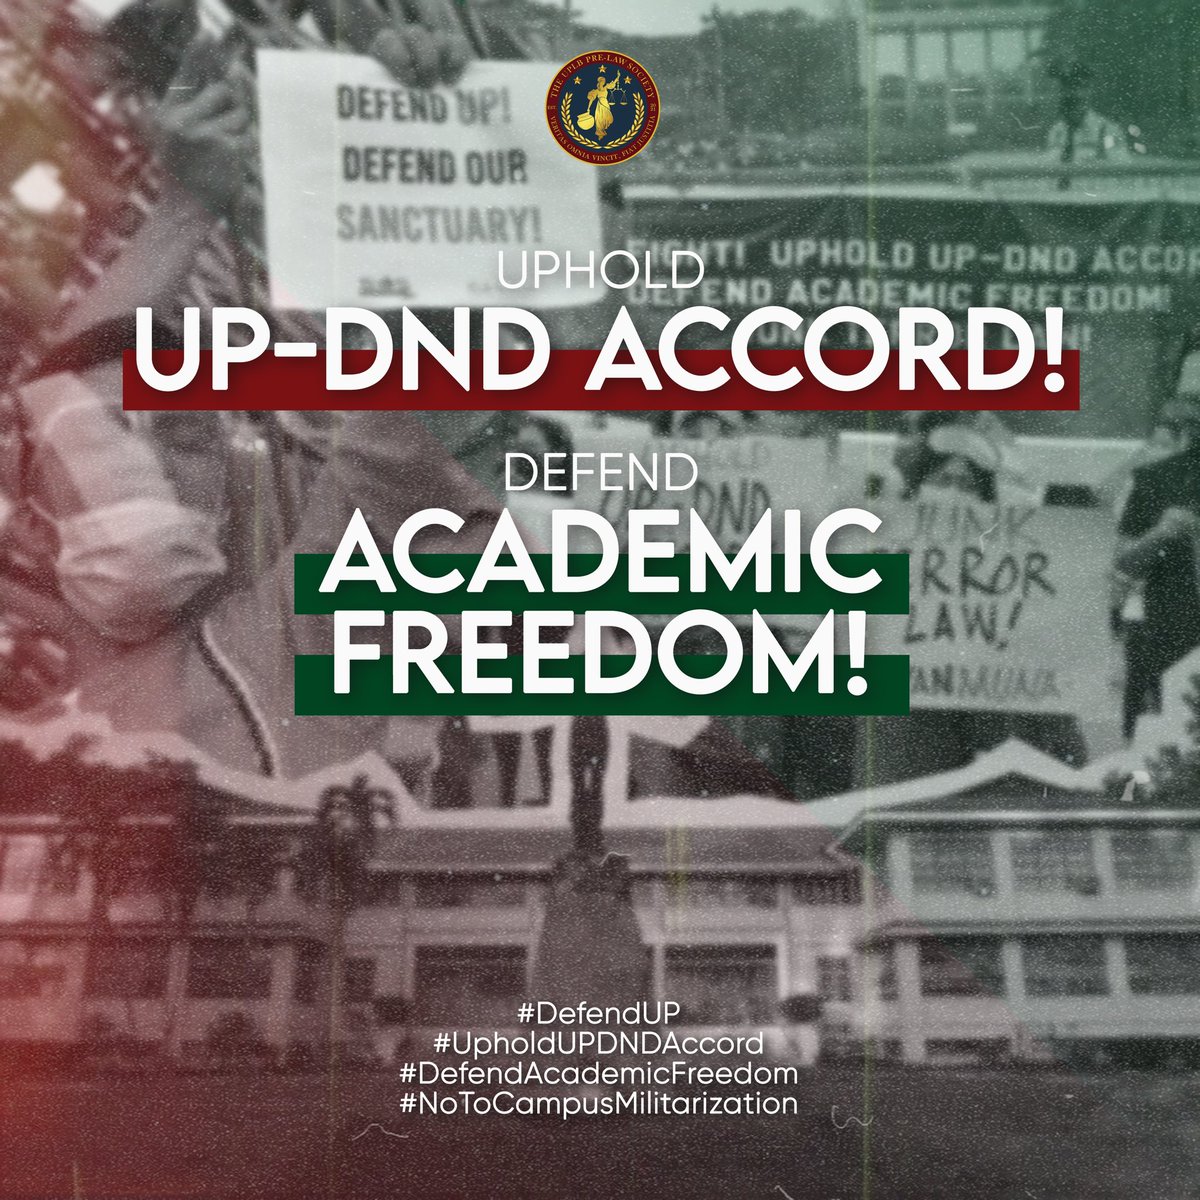 UPHOLD THE UP-DND ACCORD! DEFEND ACADEMIC FREEDOM!

The UPLB Pre-Law Society firmly stands with the UP Community to defend and uphold academic freedom! 

Read the statement here:bit.ly/Defend_UP

#DefendUP
#UpholdUPDNDAccord
#DefendAcademicFreedom
#NoToCampusMilitarization